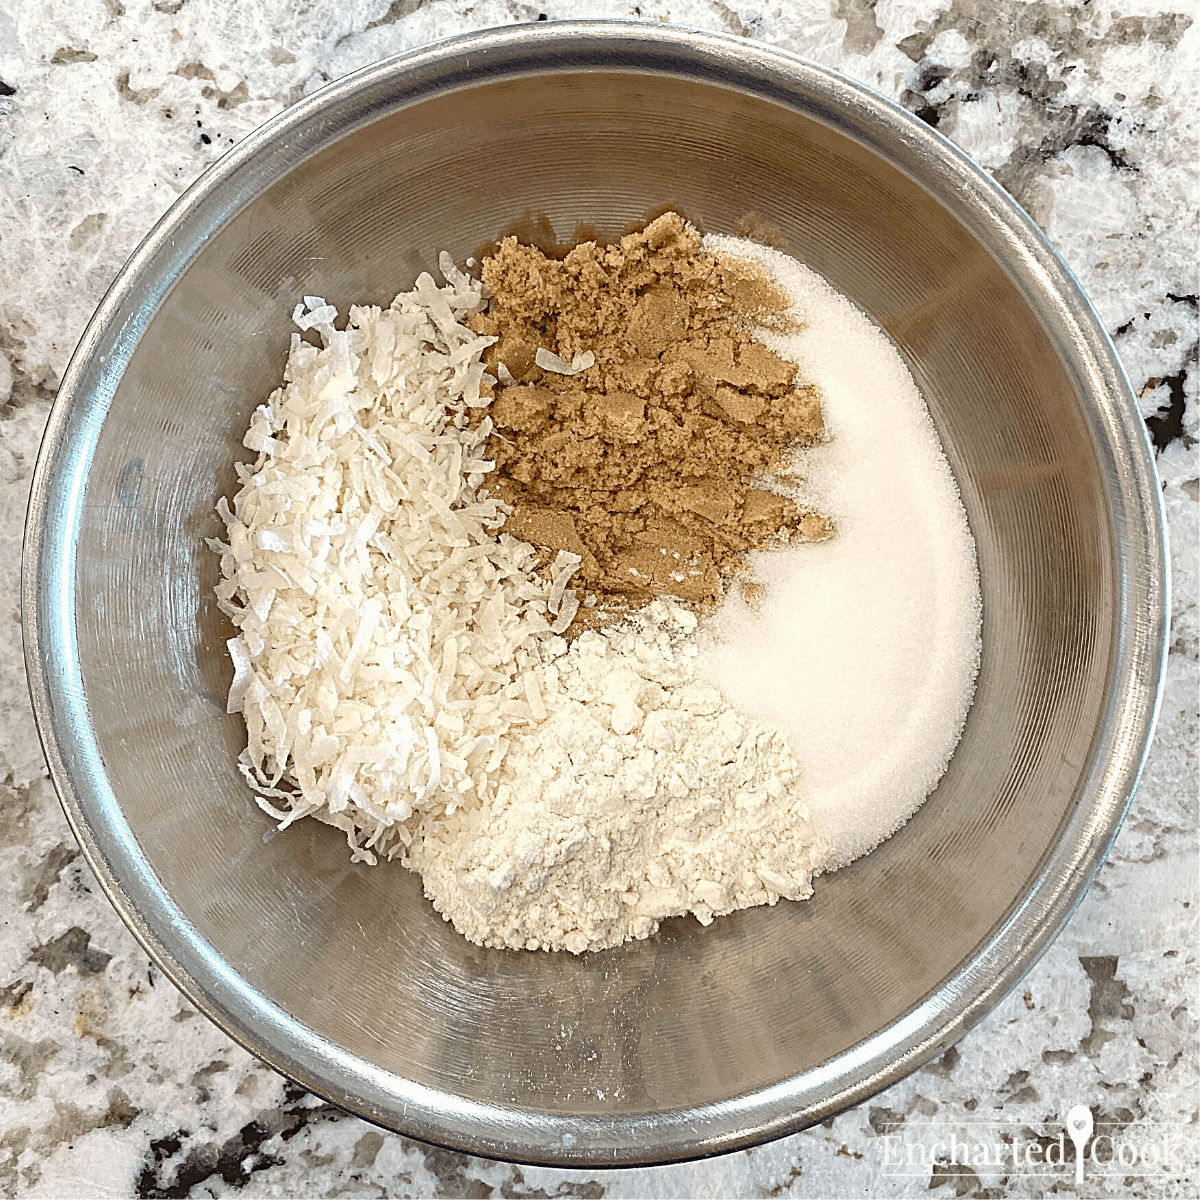 The dry ingredients for coconut crumb topping in a small bowl.